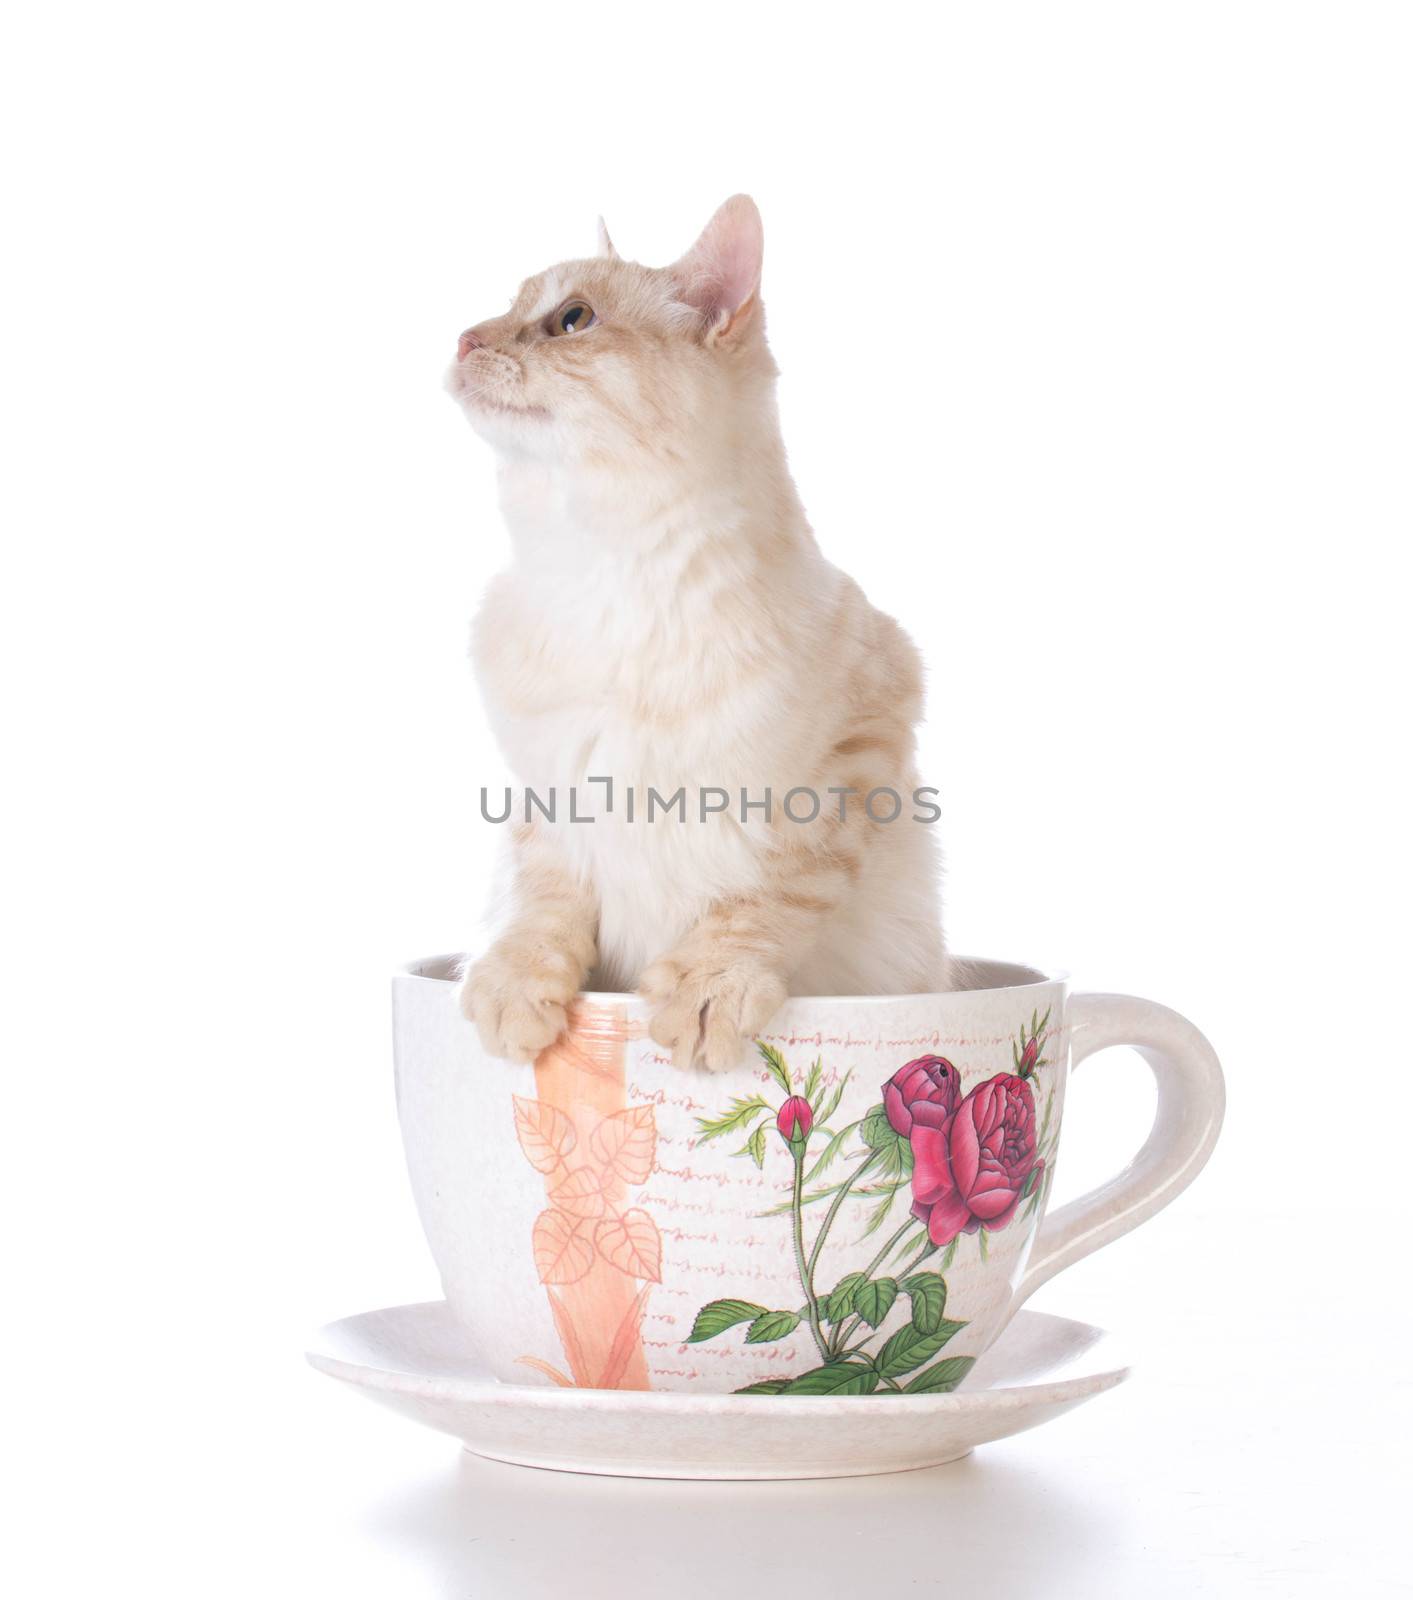 kitten in a teacup by willeecole123